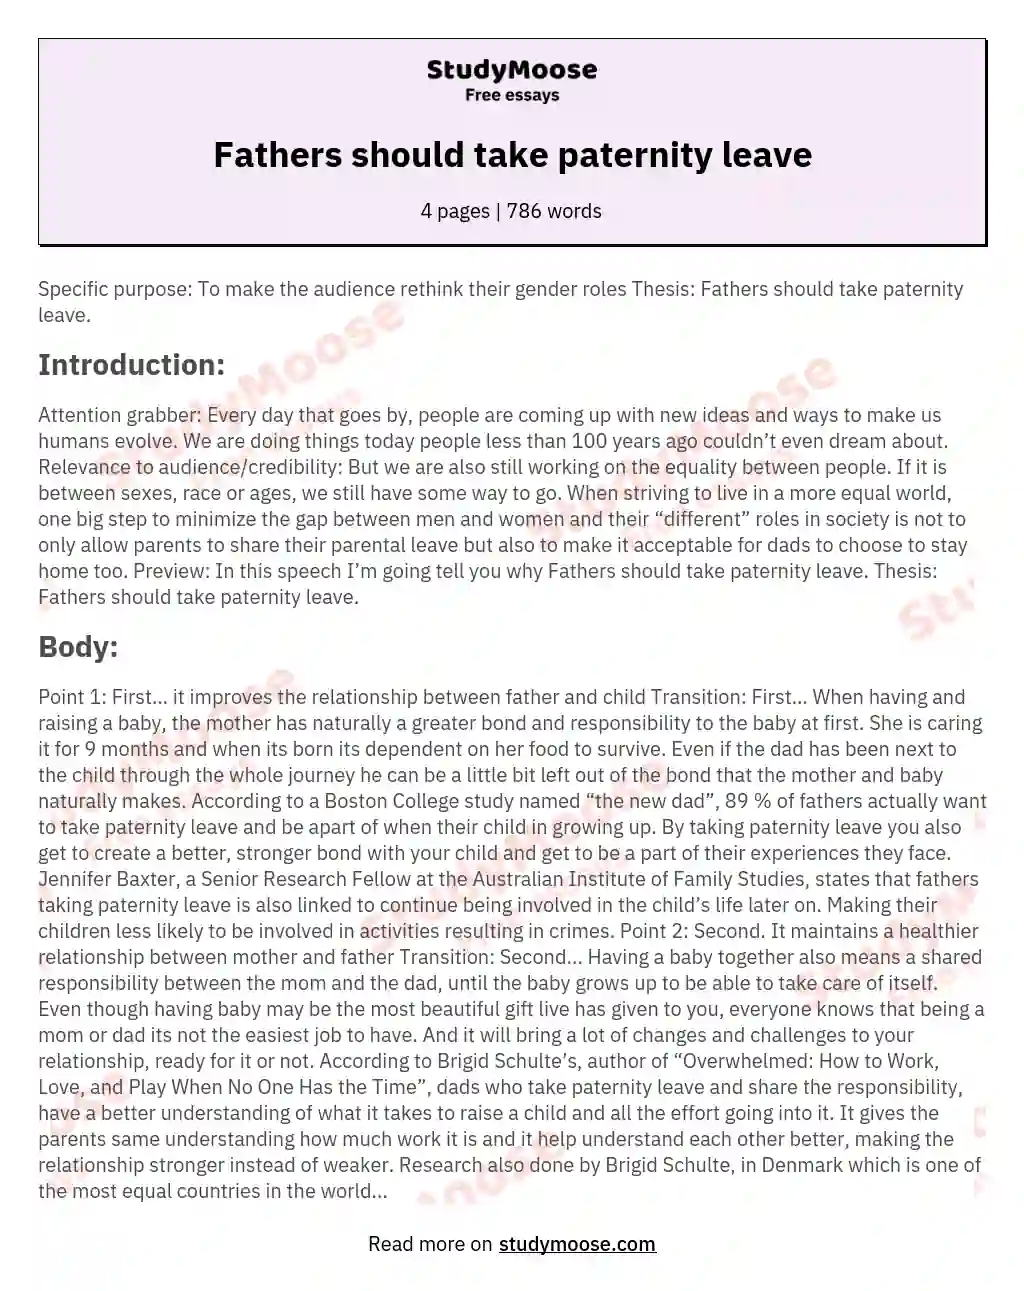 Fathers should take paternity leave